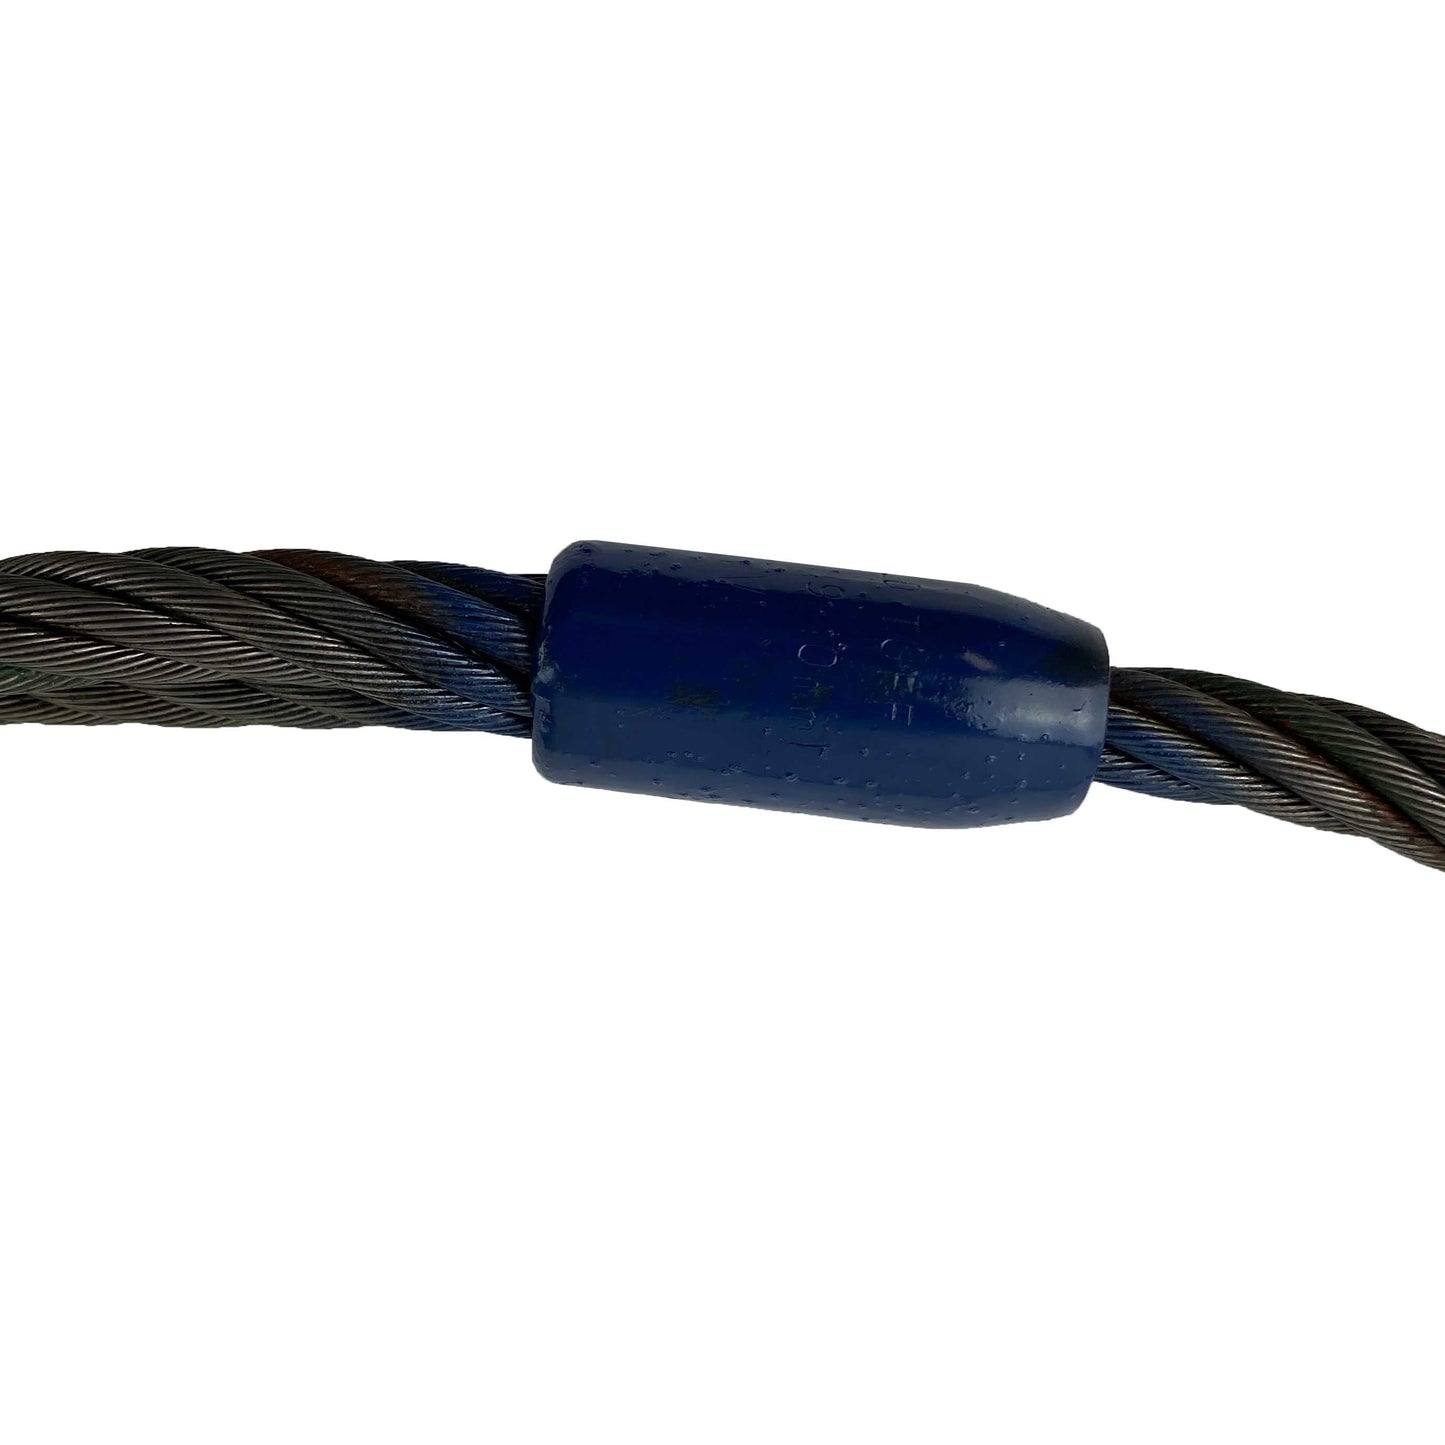 138 inch x 6 foot Mechanical Splice Grommet Wire Rope Sling image 4 of 4